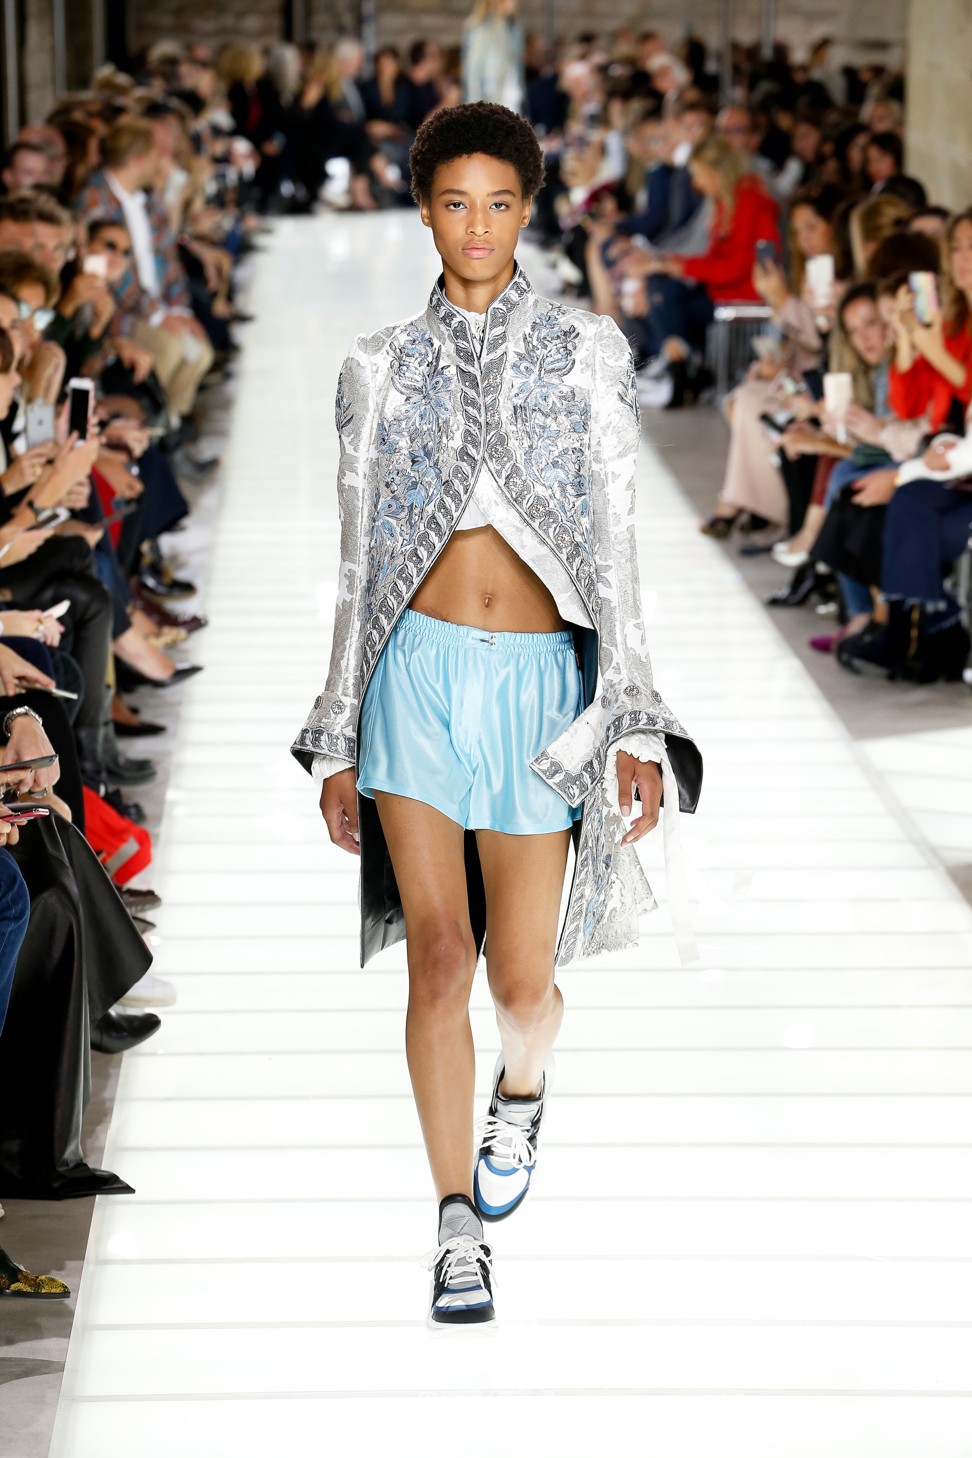 Louis Vuitton’s Nicolas Ghesquière infuses sporty chic with ...